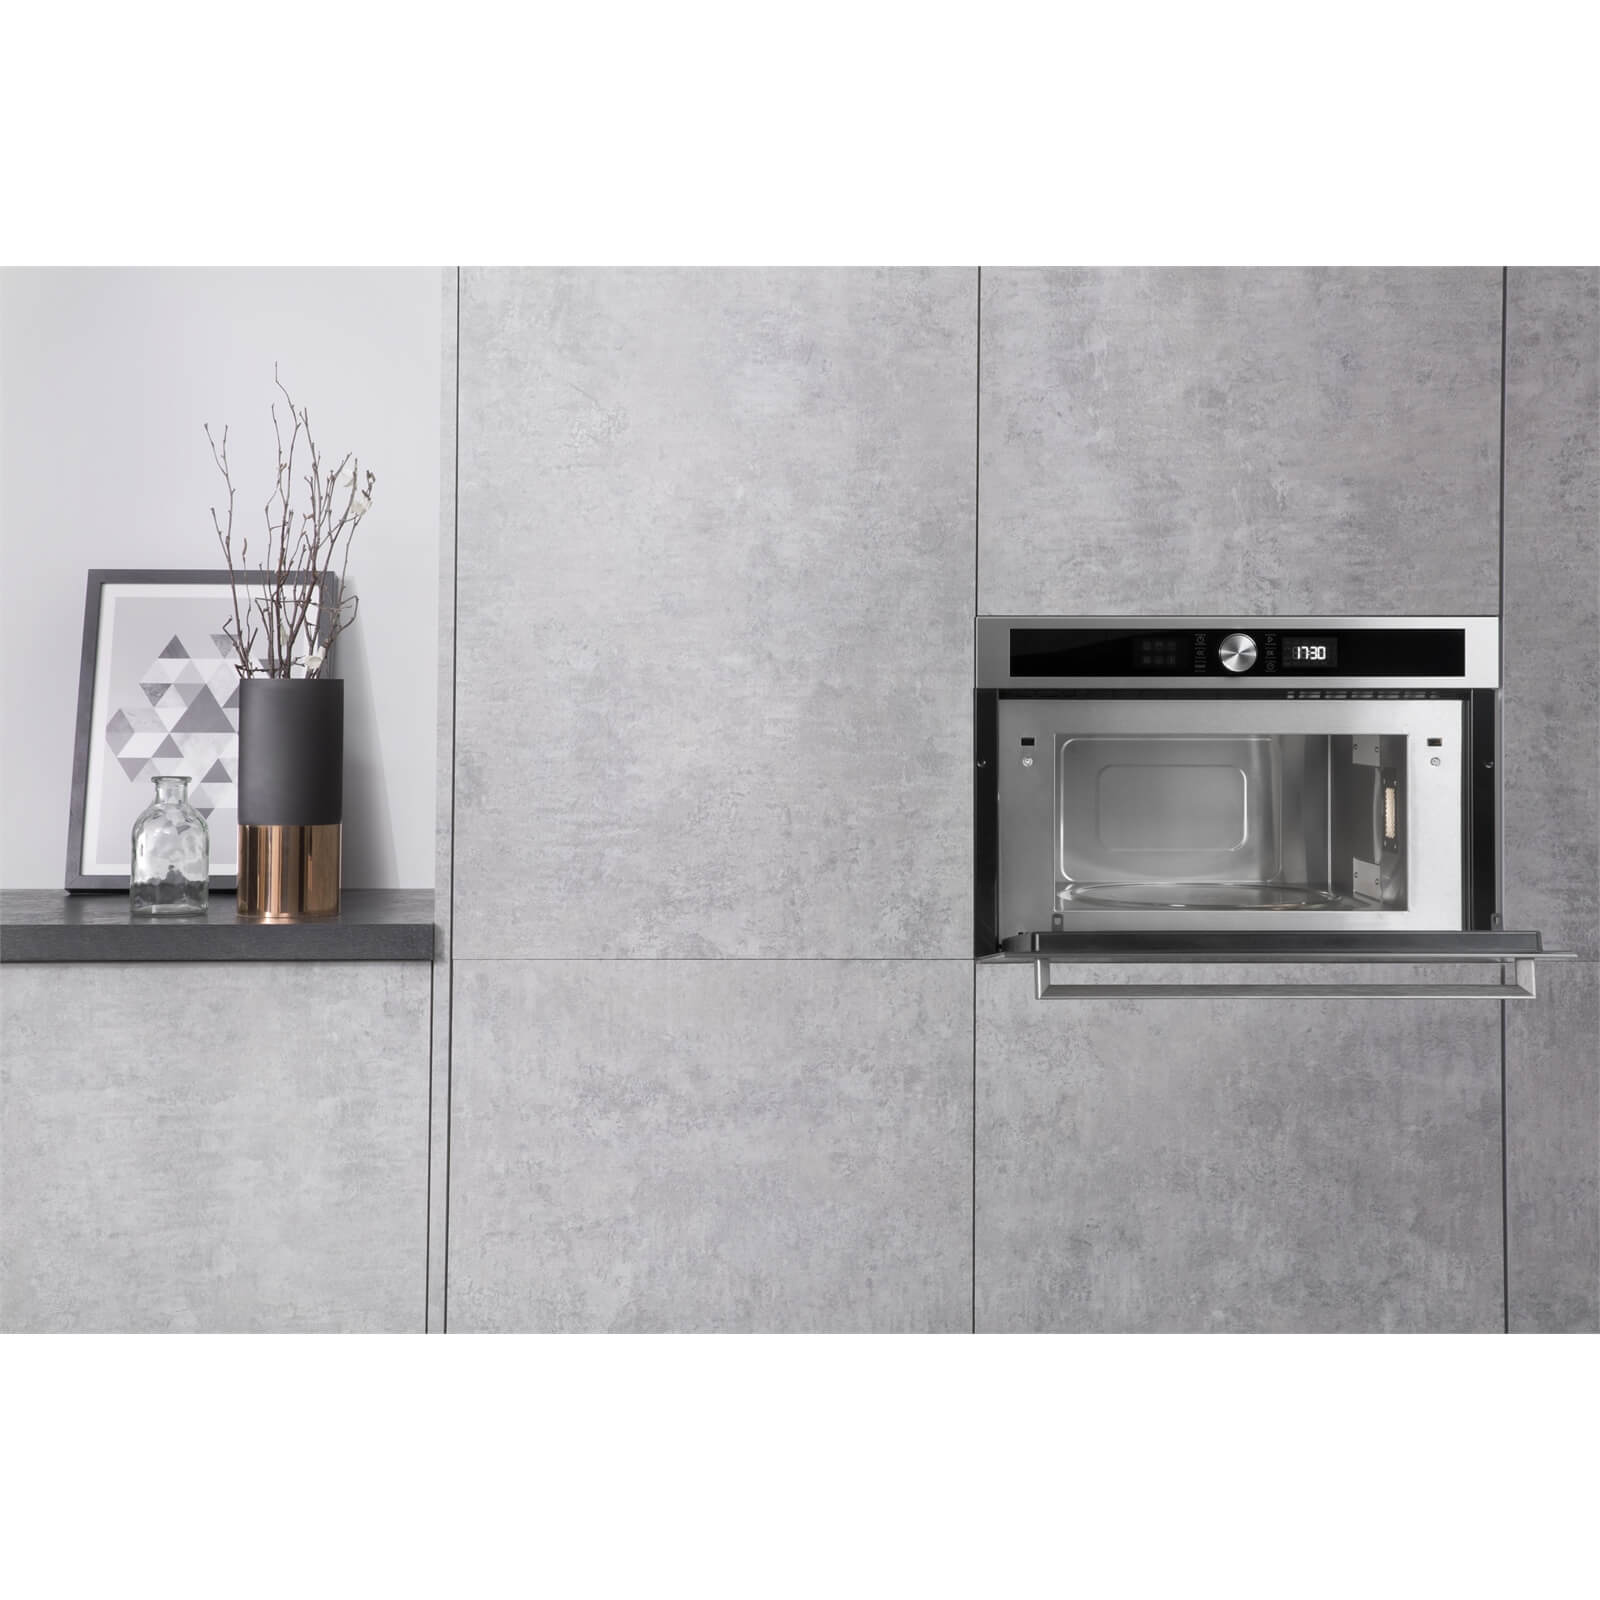 Hotpoint Class 5 MD 554 IX H Built-in Microwave - Stainless Steel